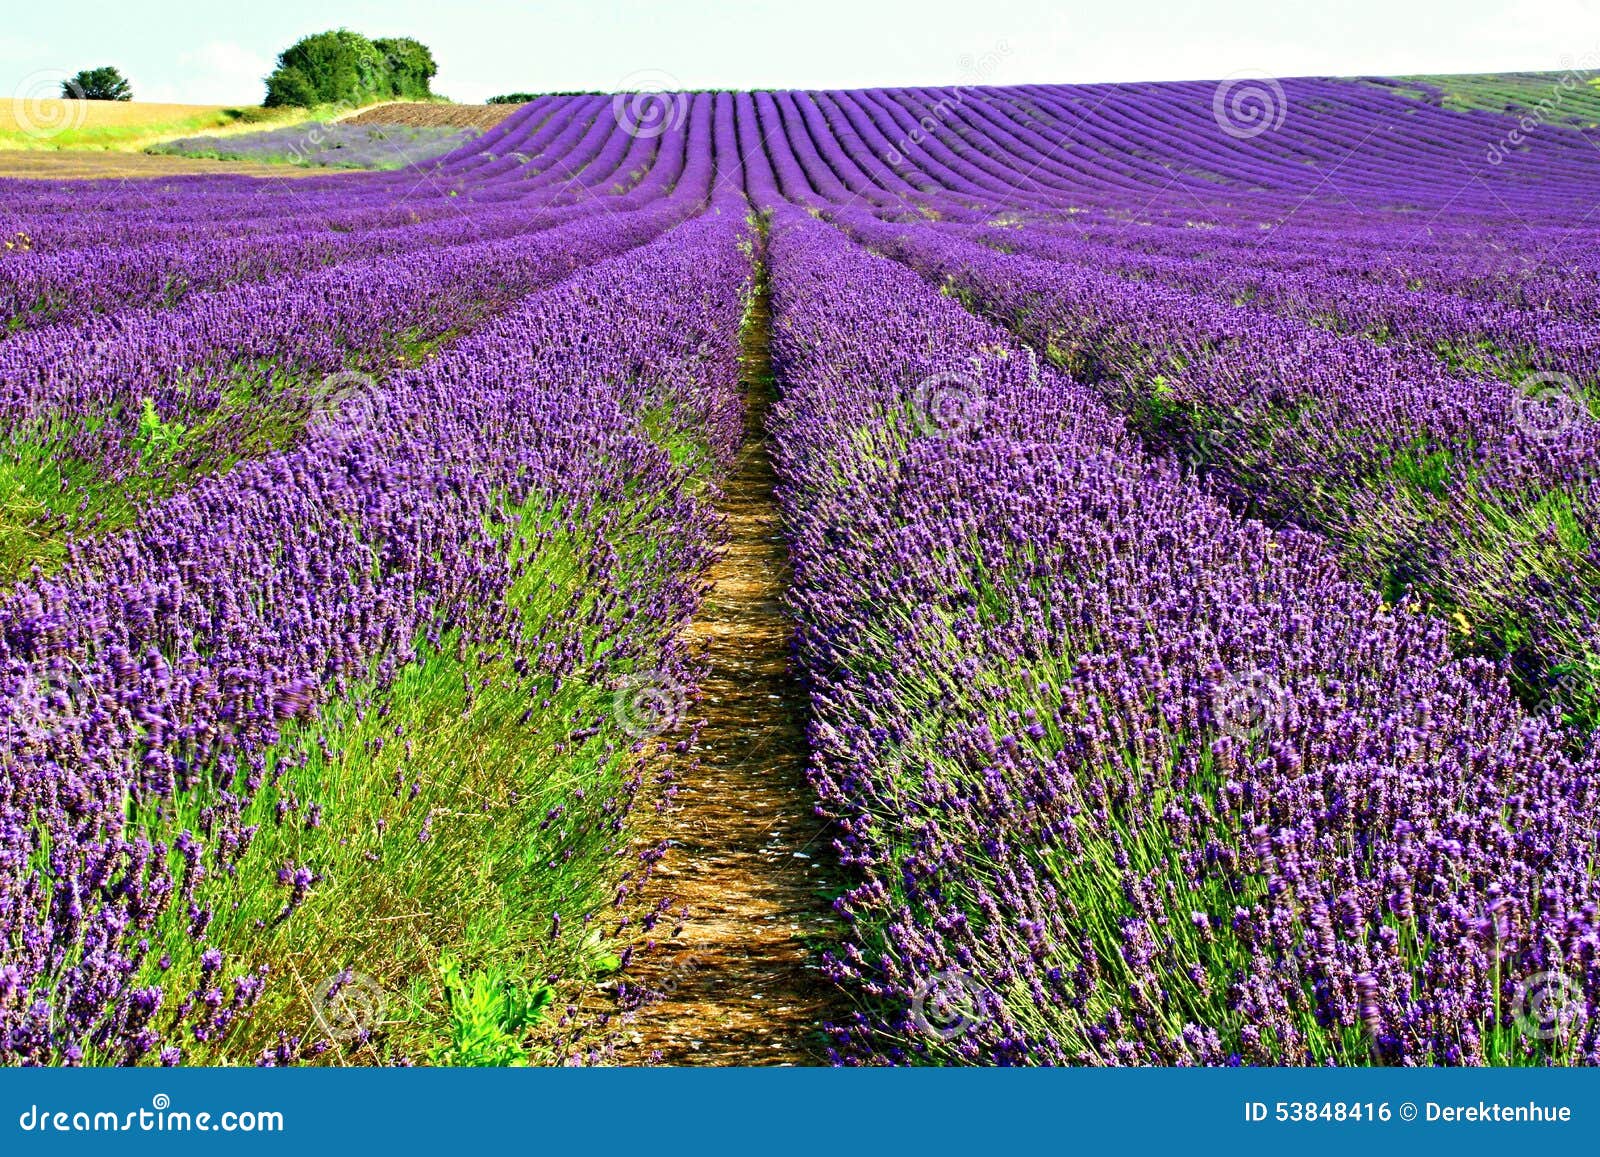 Lavinder field stock photo. Image of beauty, cultivated - 53848416